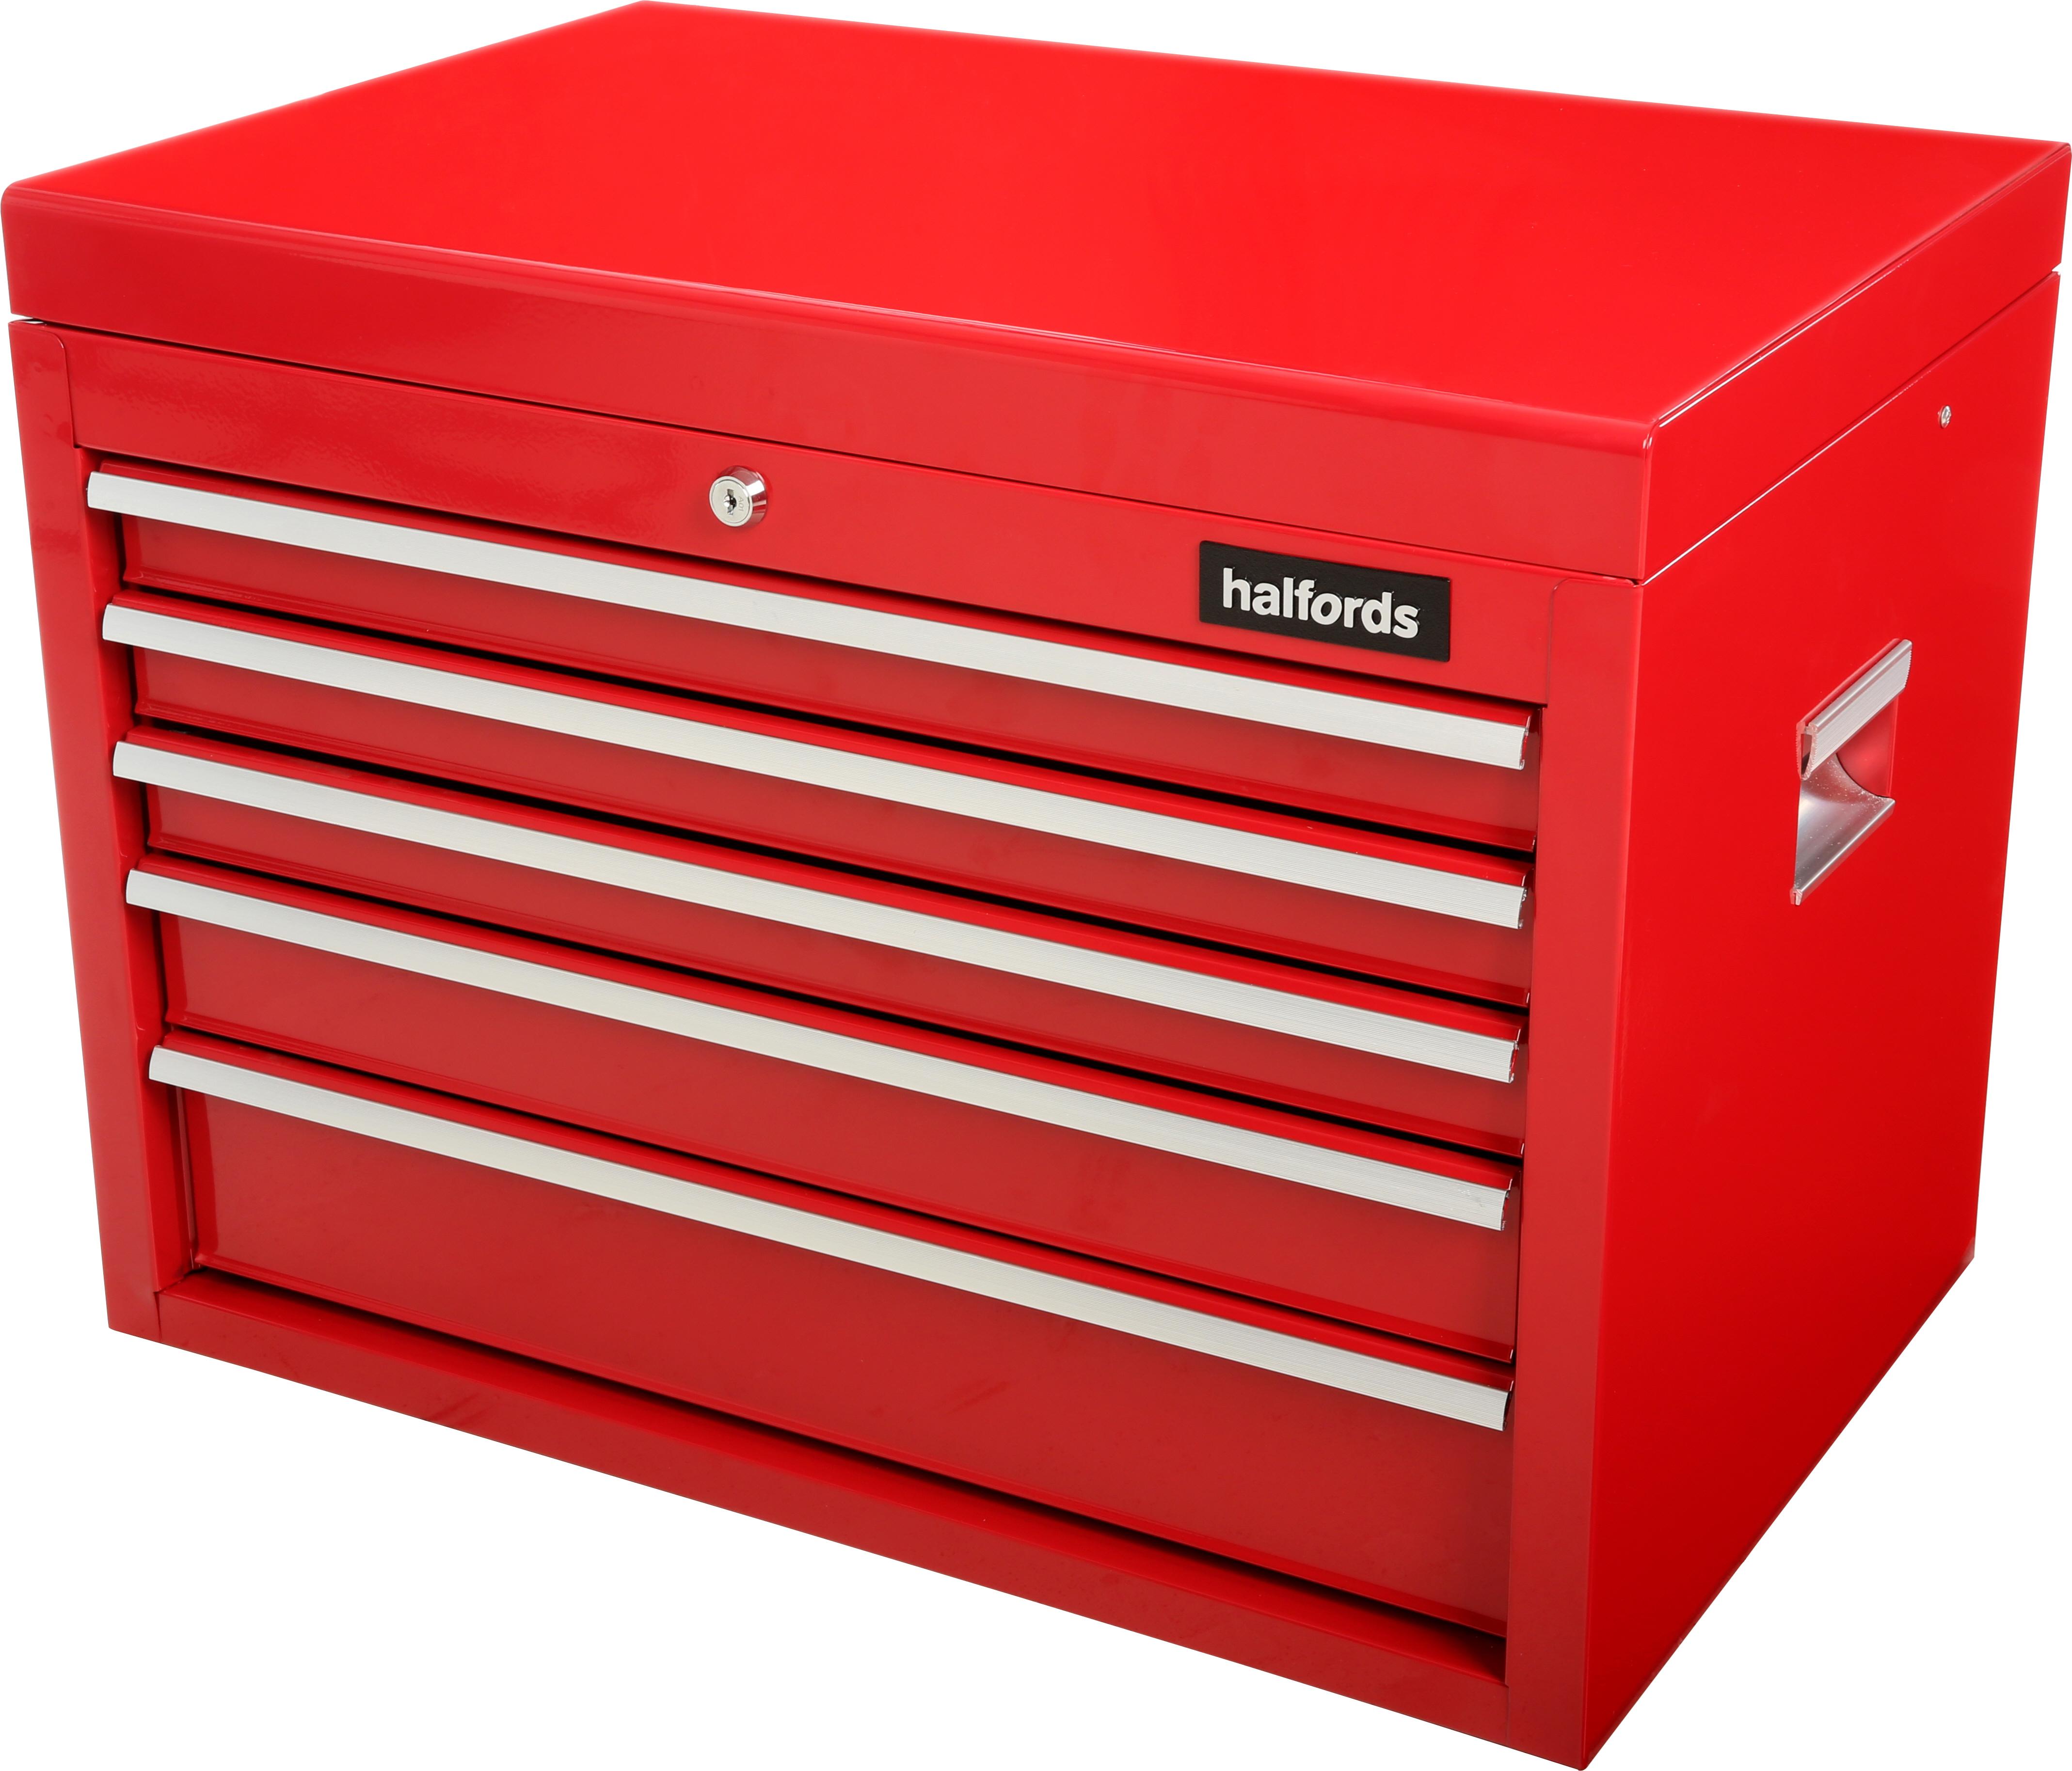 Halfords 5 Drawer Top Chest - Red